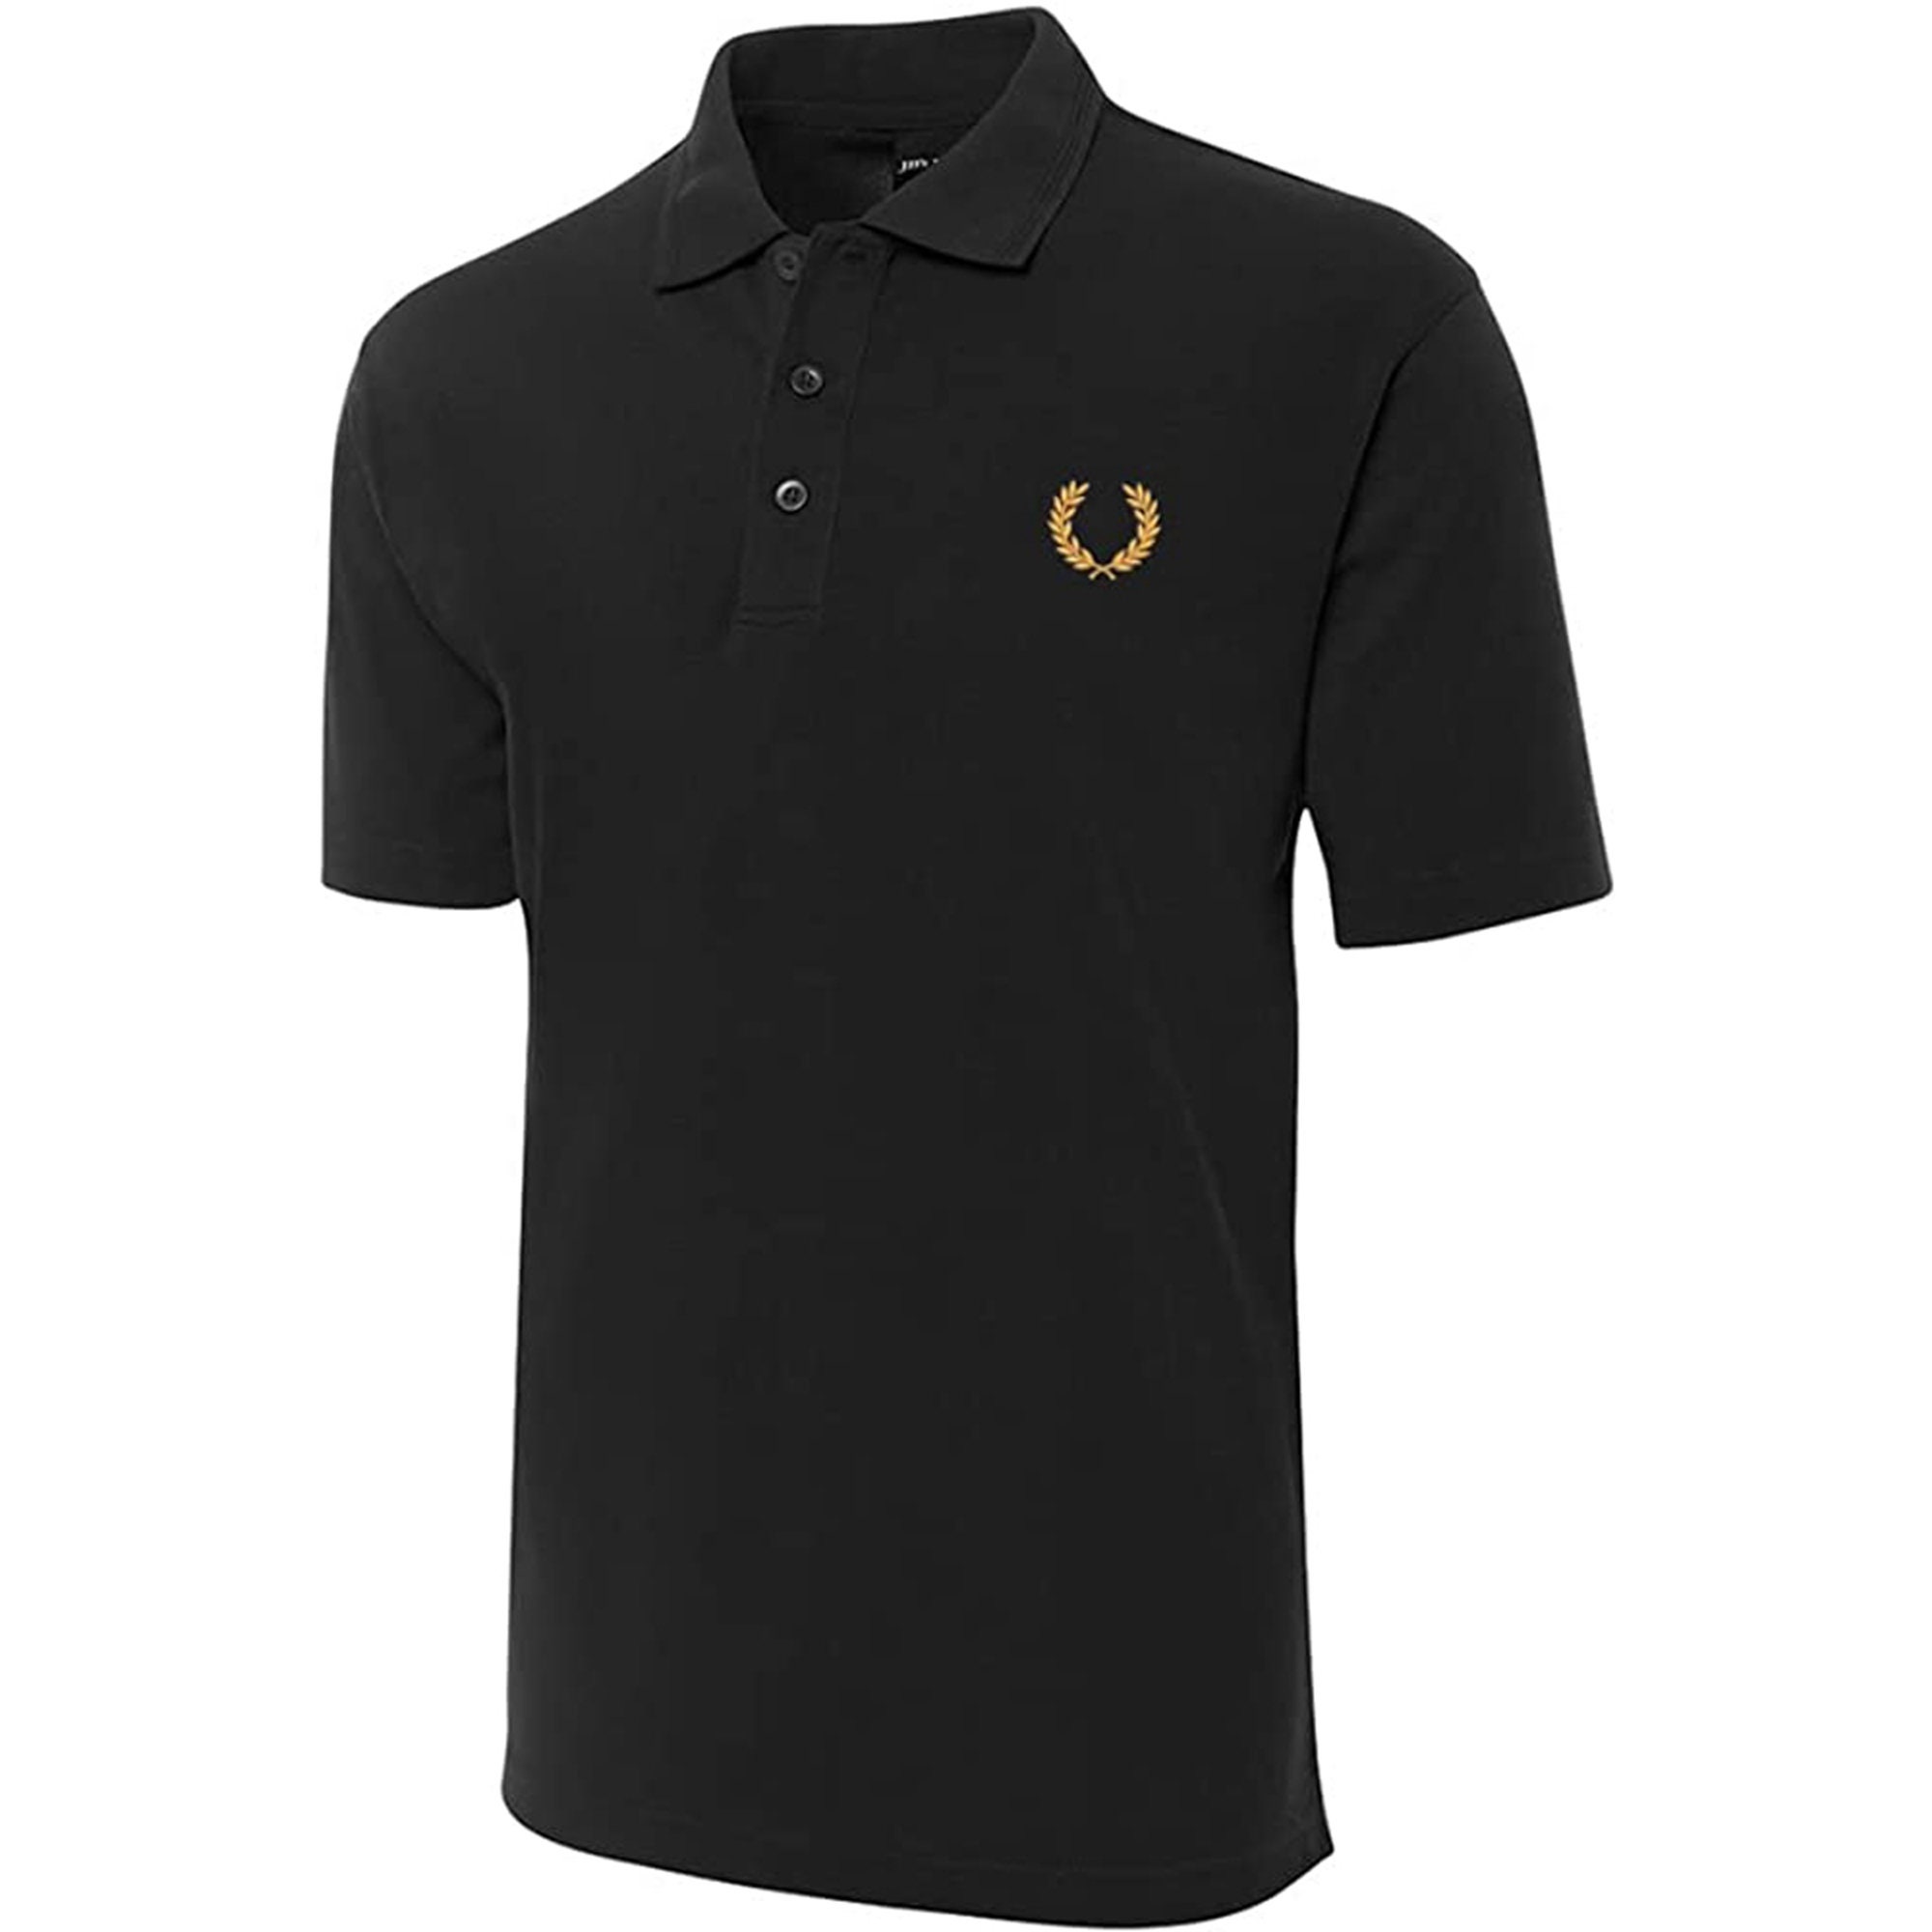 Discover Laurel Wreath Embroidered Short Sleeve Polo Shirts Classic Embroidery Men's Polo Shirt